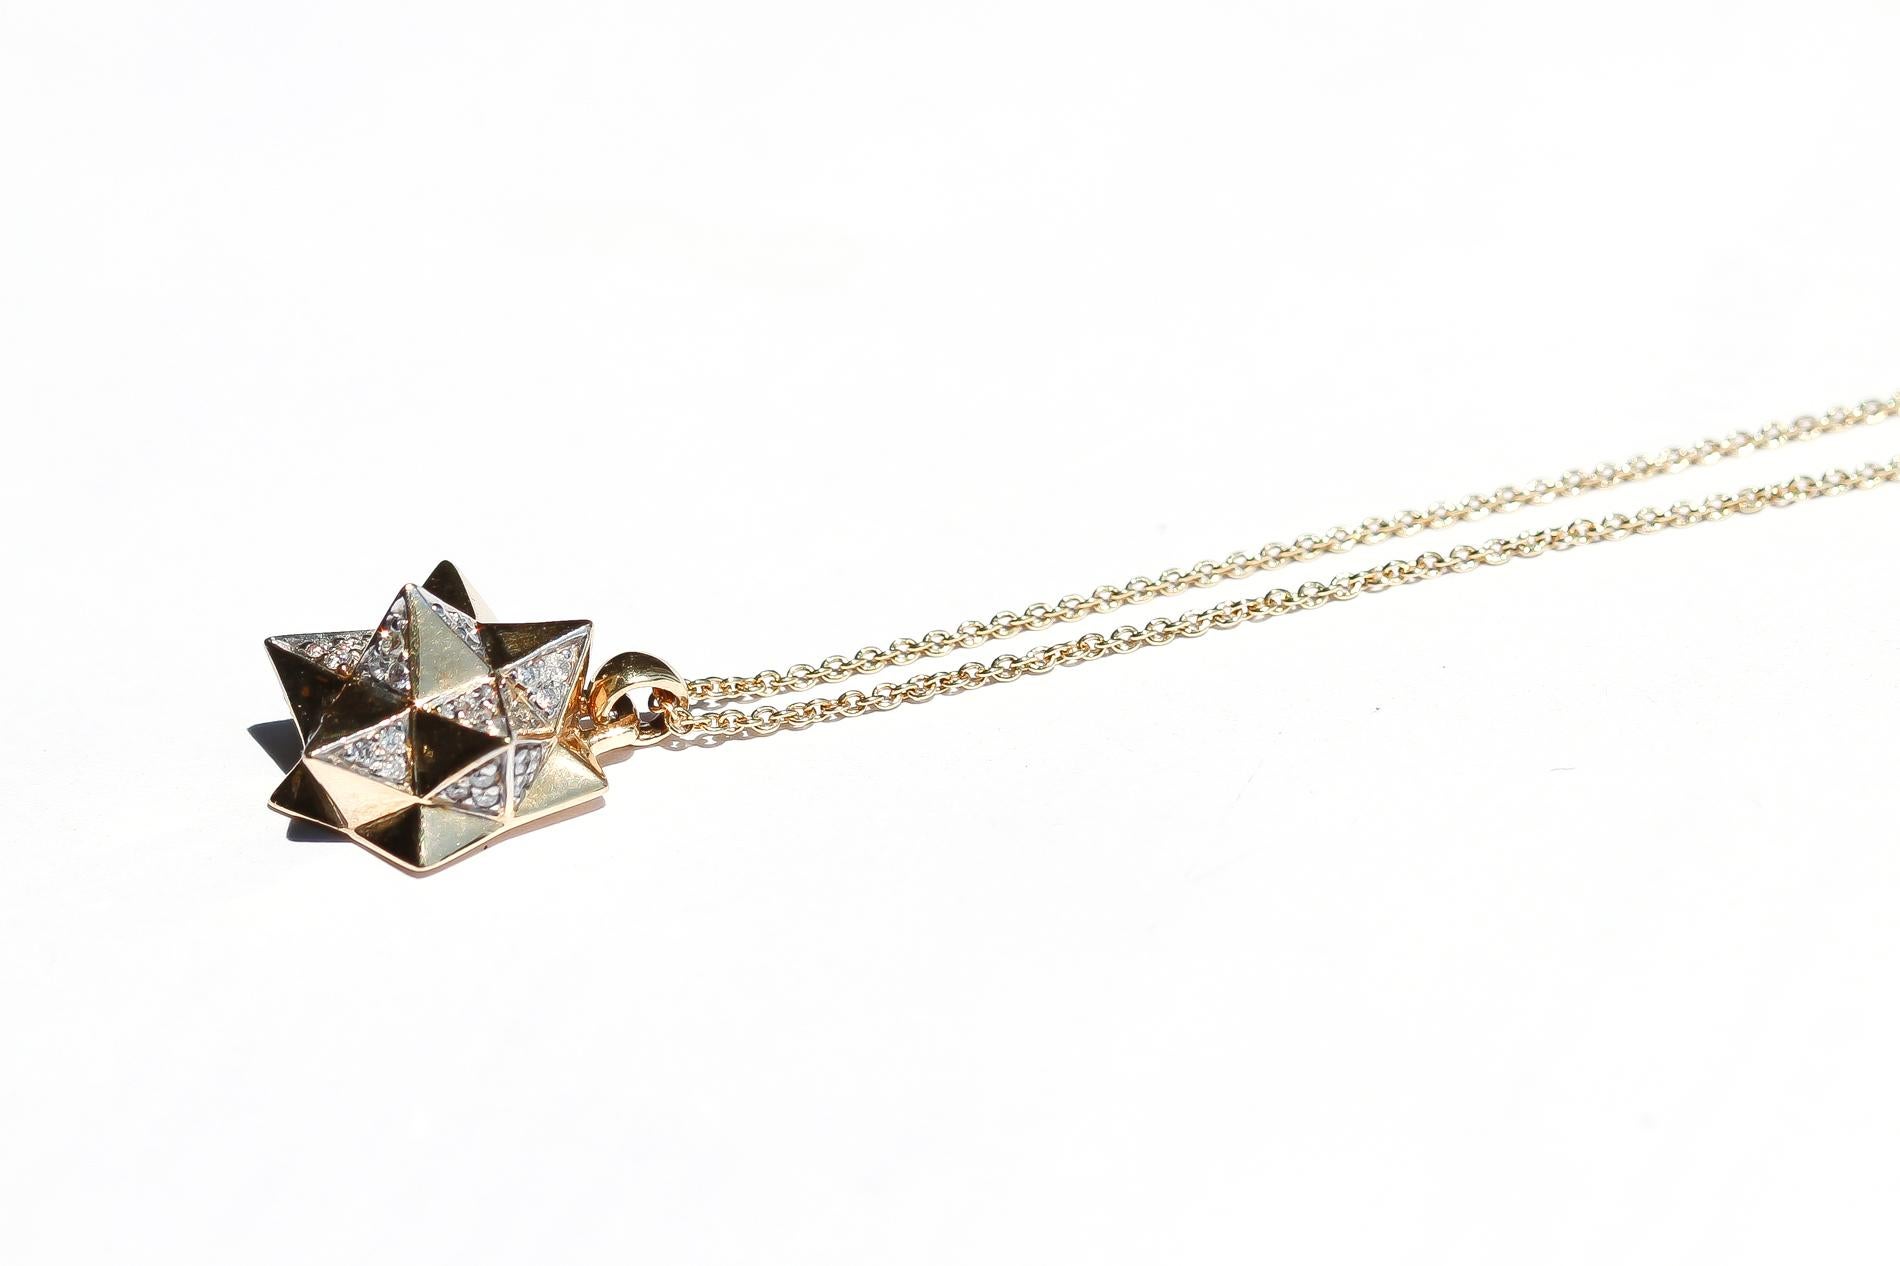 This limited edition, Tetra Diamond Necklace is an embodiment of monumental power and strength. This limited edition necklace by John Brevard is inspired by sacred geometry, namely the star tetrahedron. This necklace features sacred geometric forms